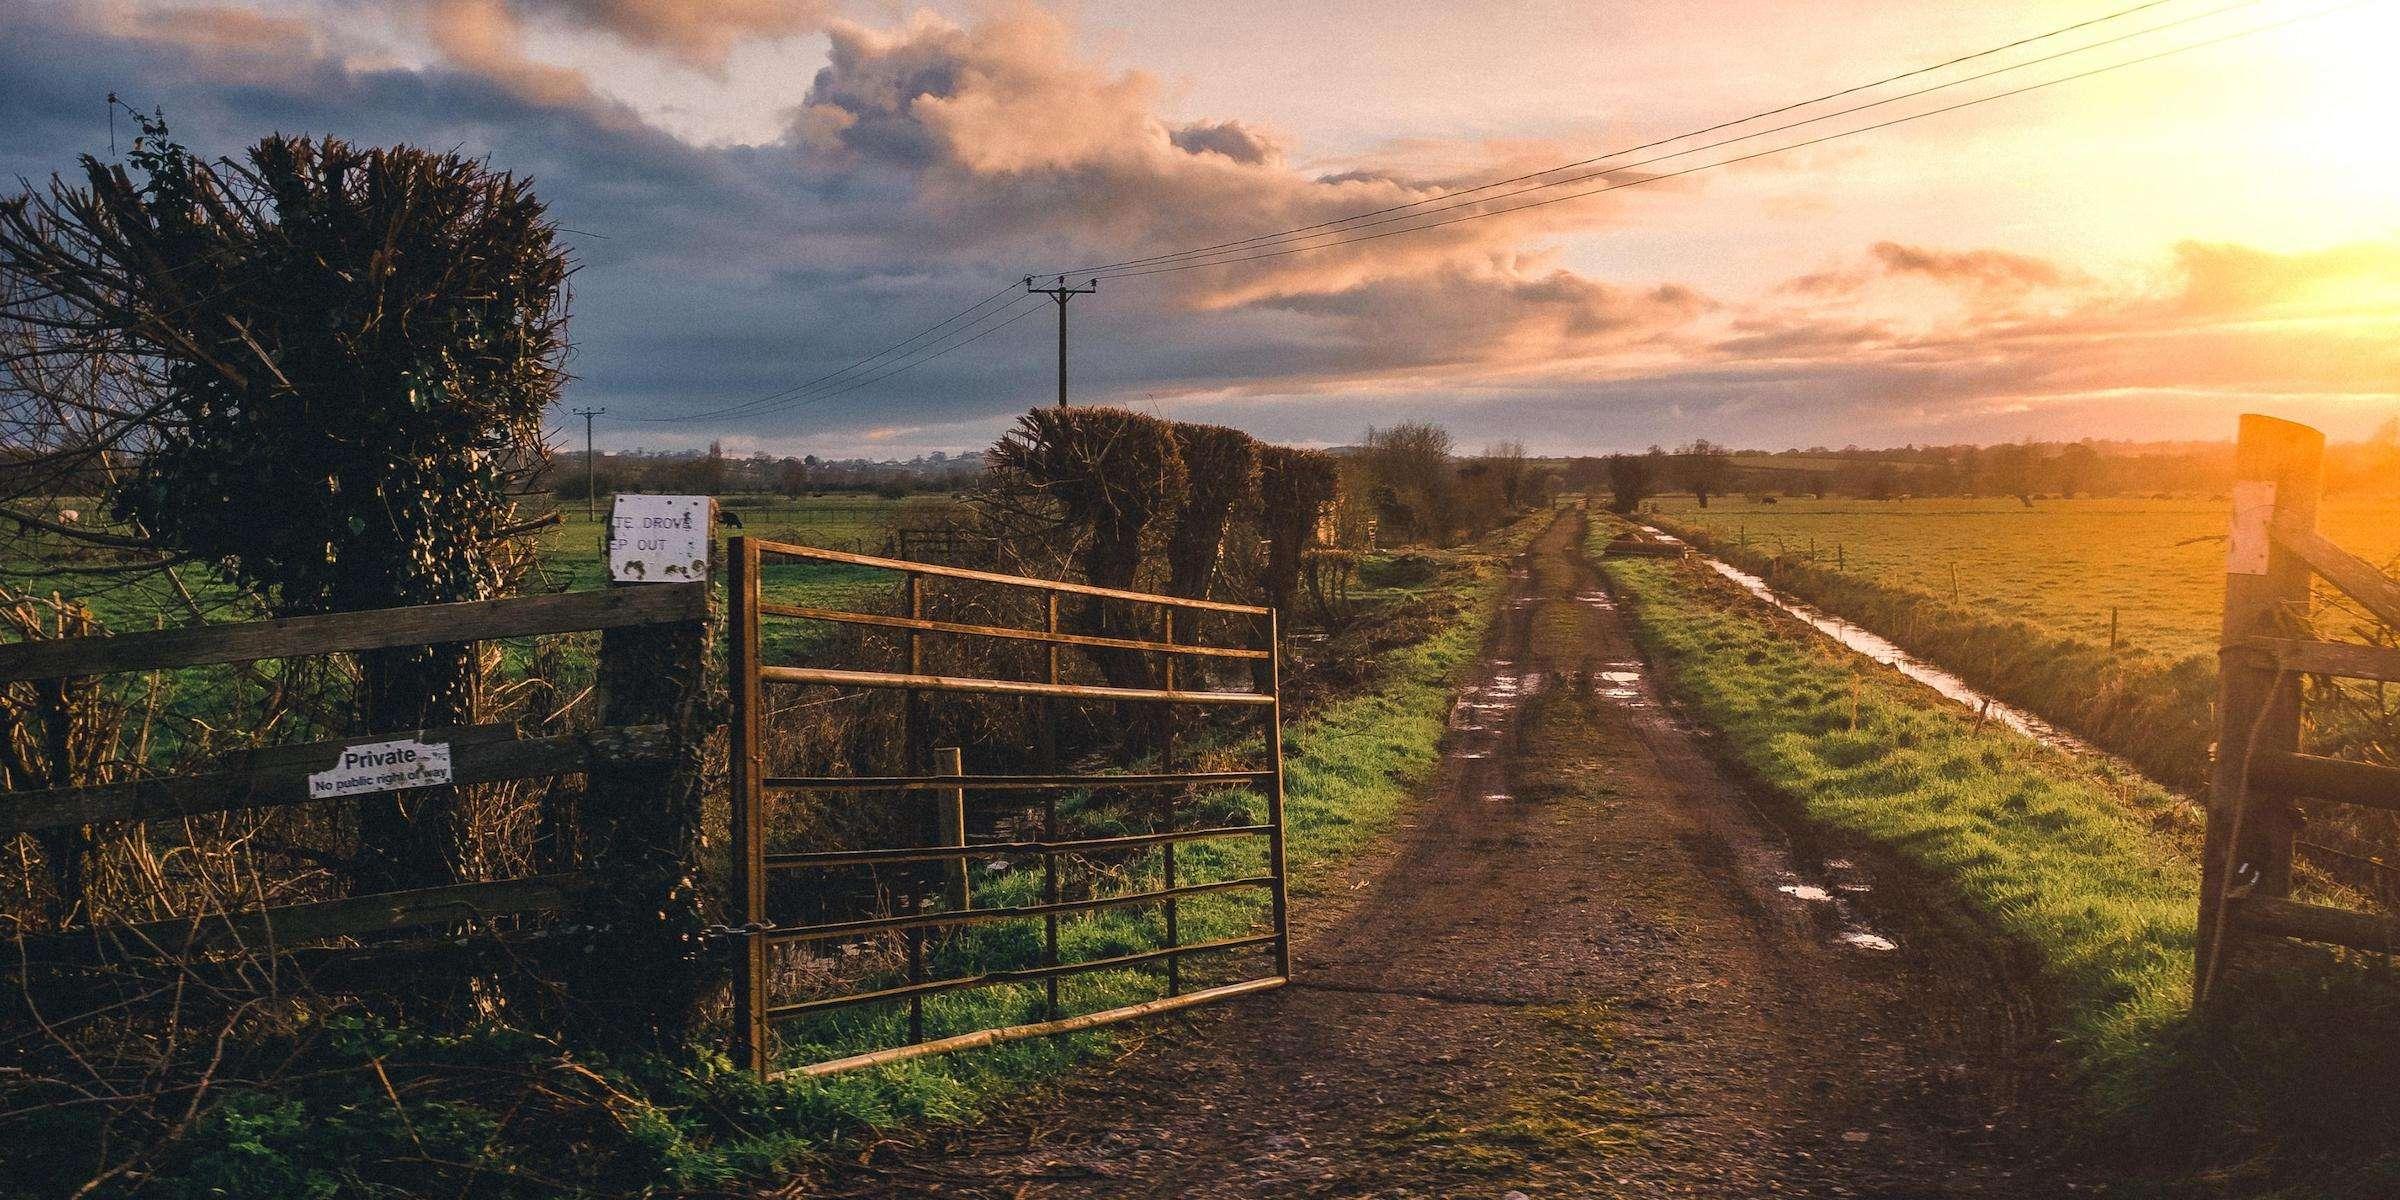 Farm at sunset by gate